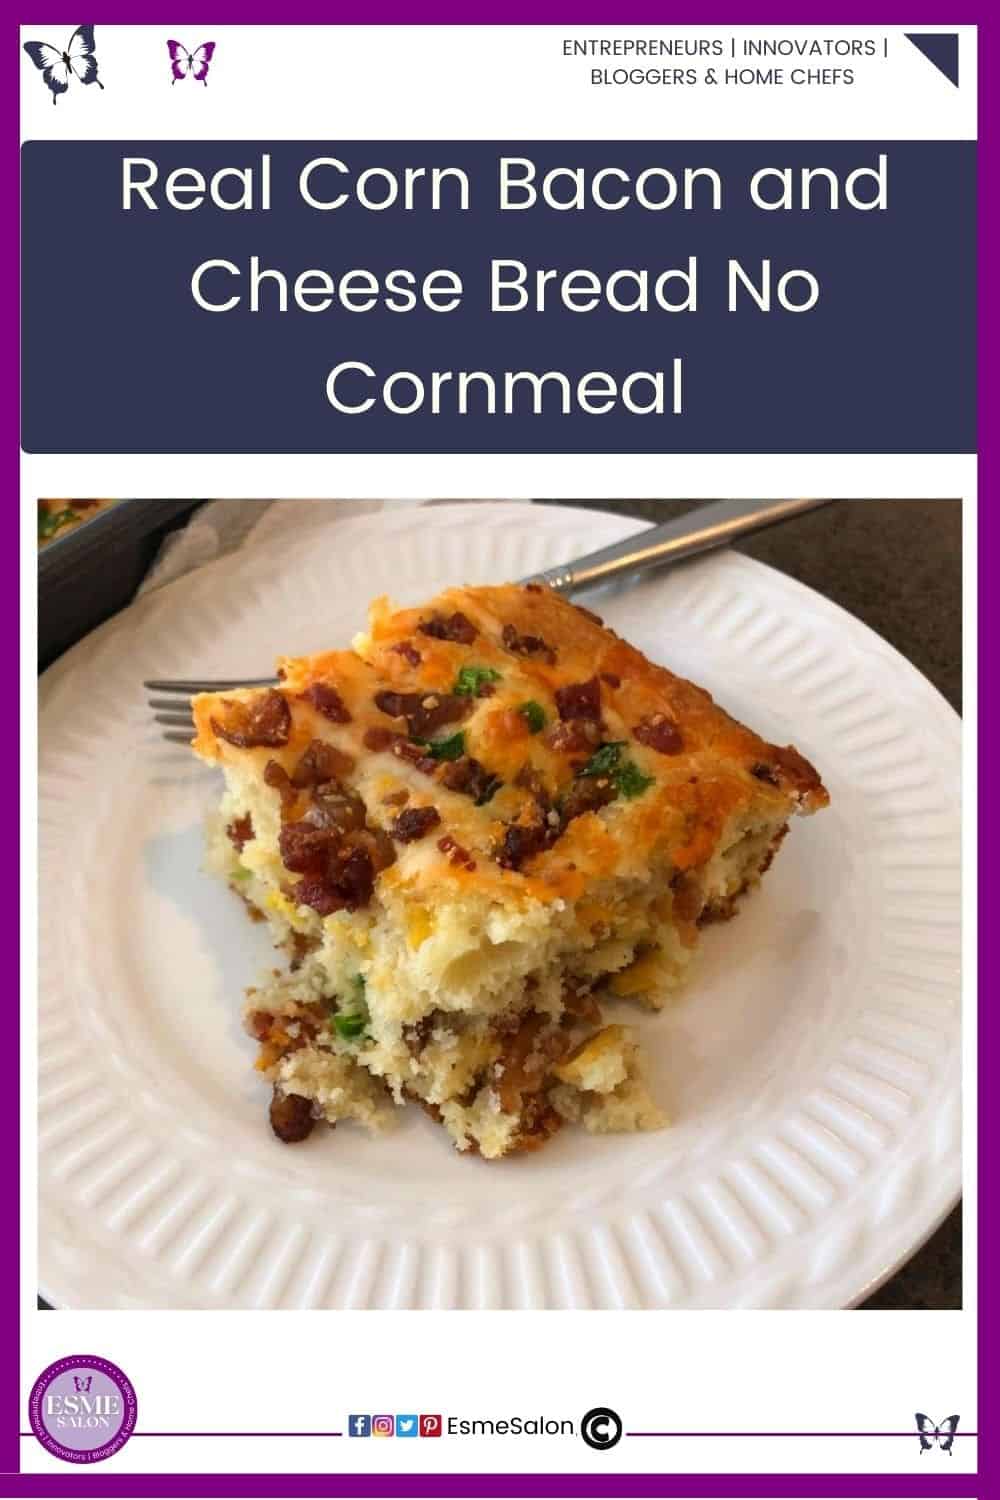 an image of a cube of Real Corn Bacon and Cheese Bread but No Cornmeal plated on a white dinner plate with a fork on the side